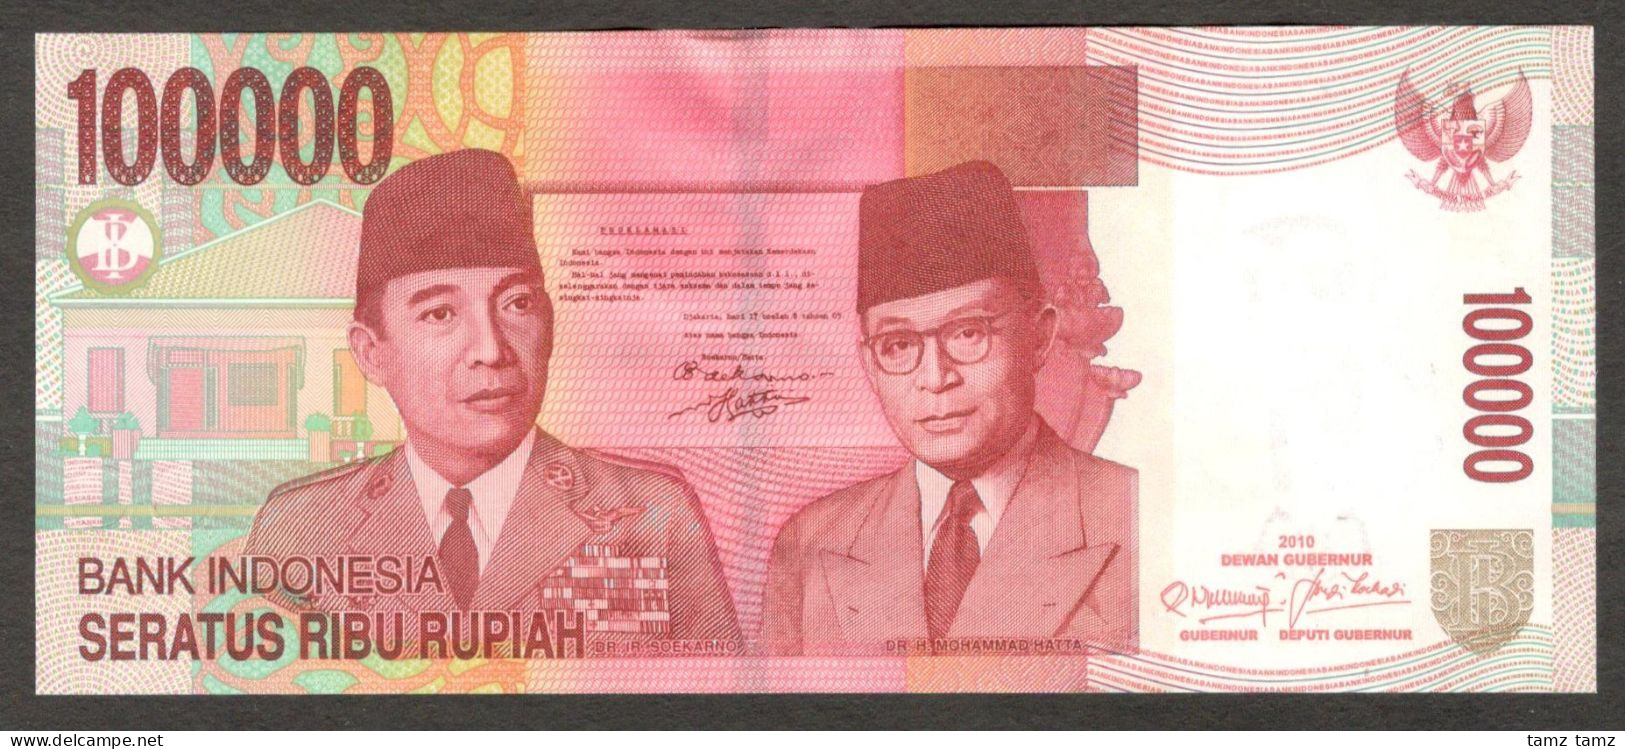 Indonesia 100000 100,000 Rupiah Replacement W/o Omron Rings P-146g* 2010/2004 UNC - Indonesië